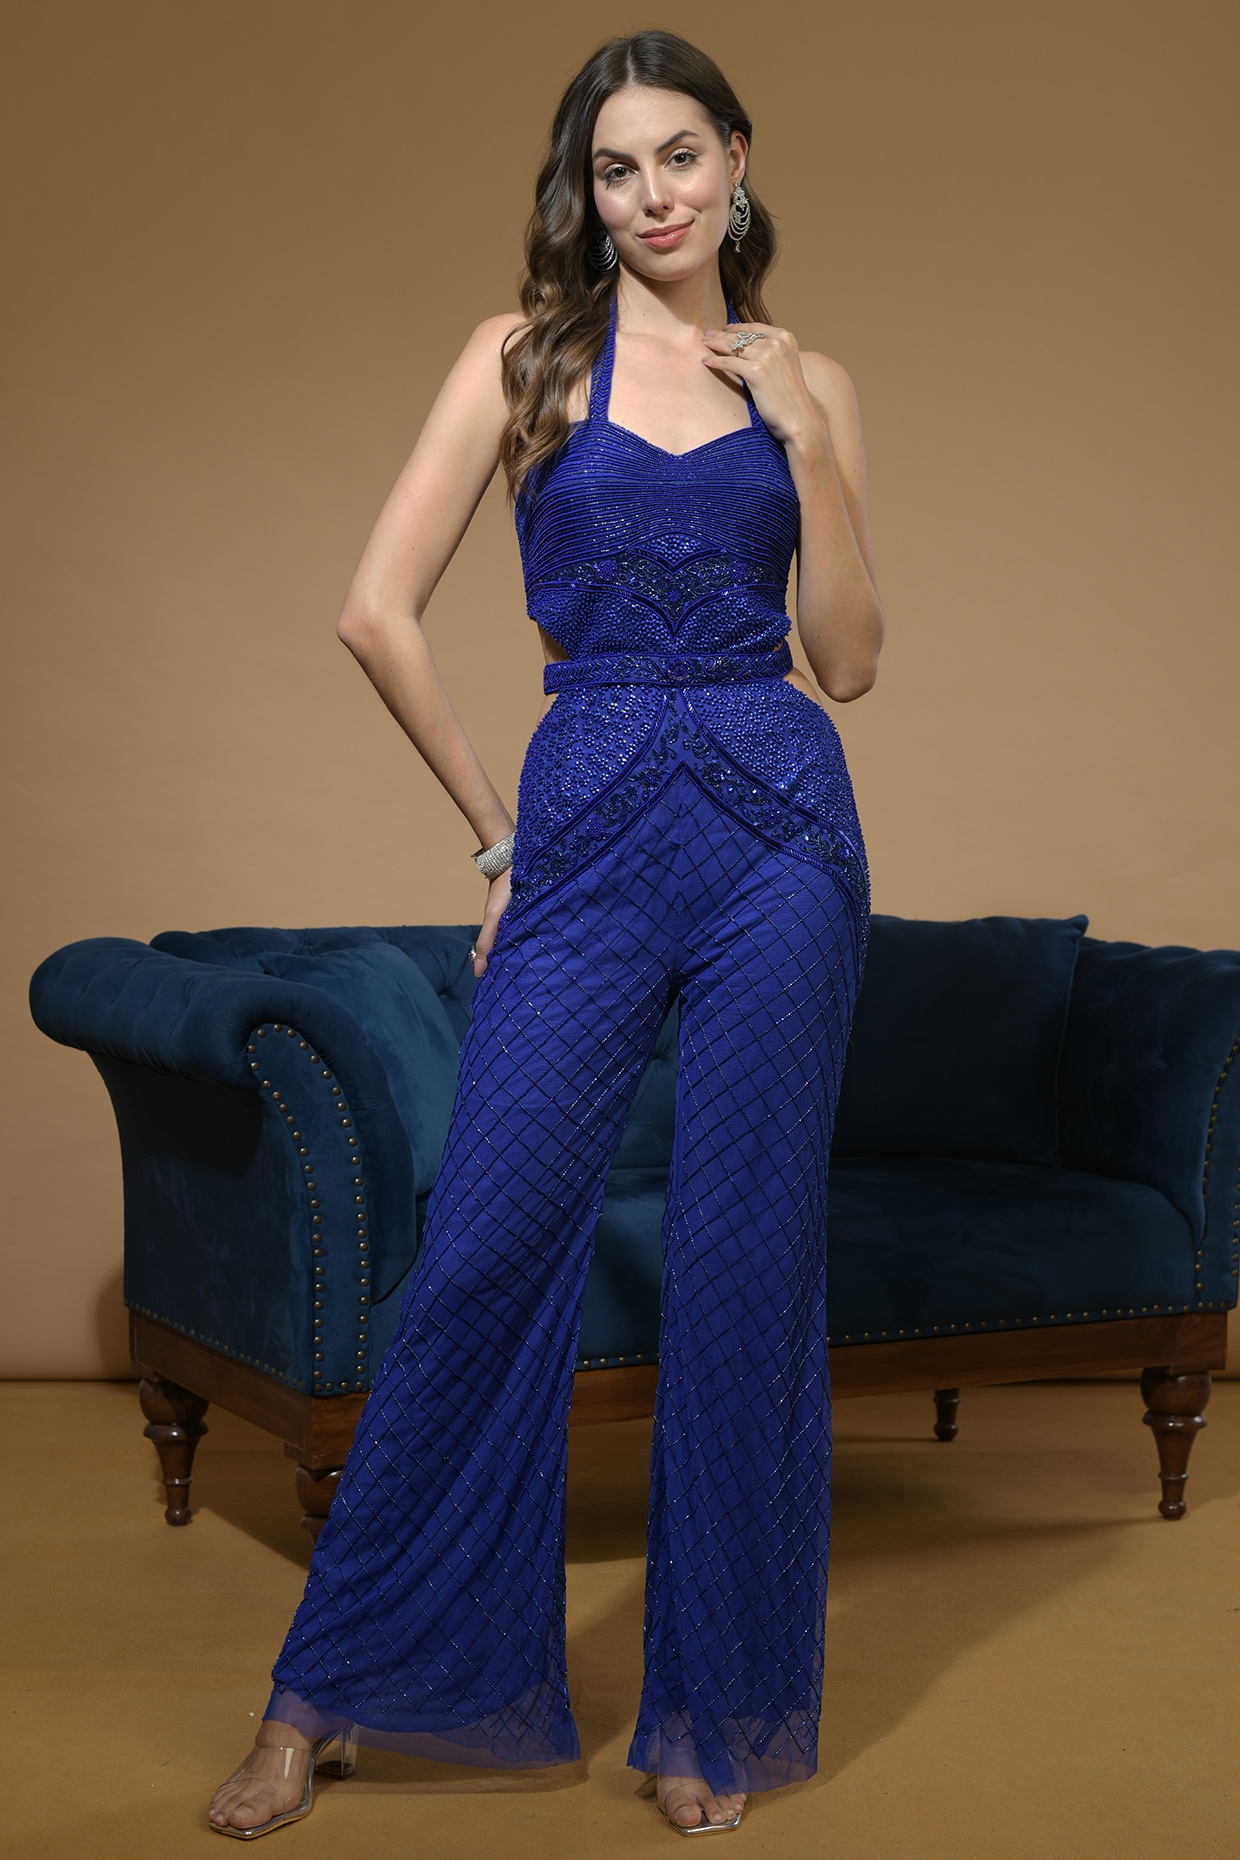 In Cut Pleated Jumpsuit For Women, Party Wear Printed Indo Western Outfit |  eBay